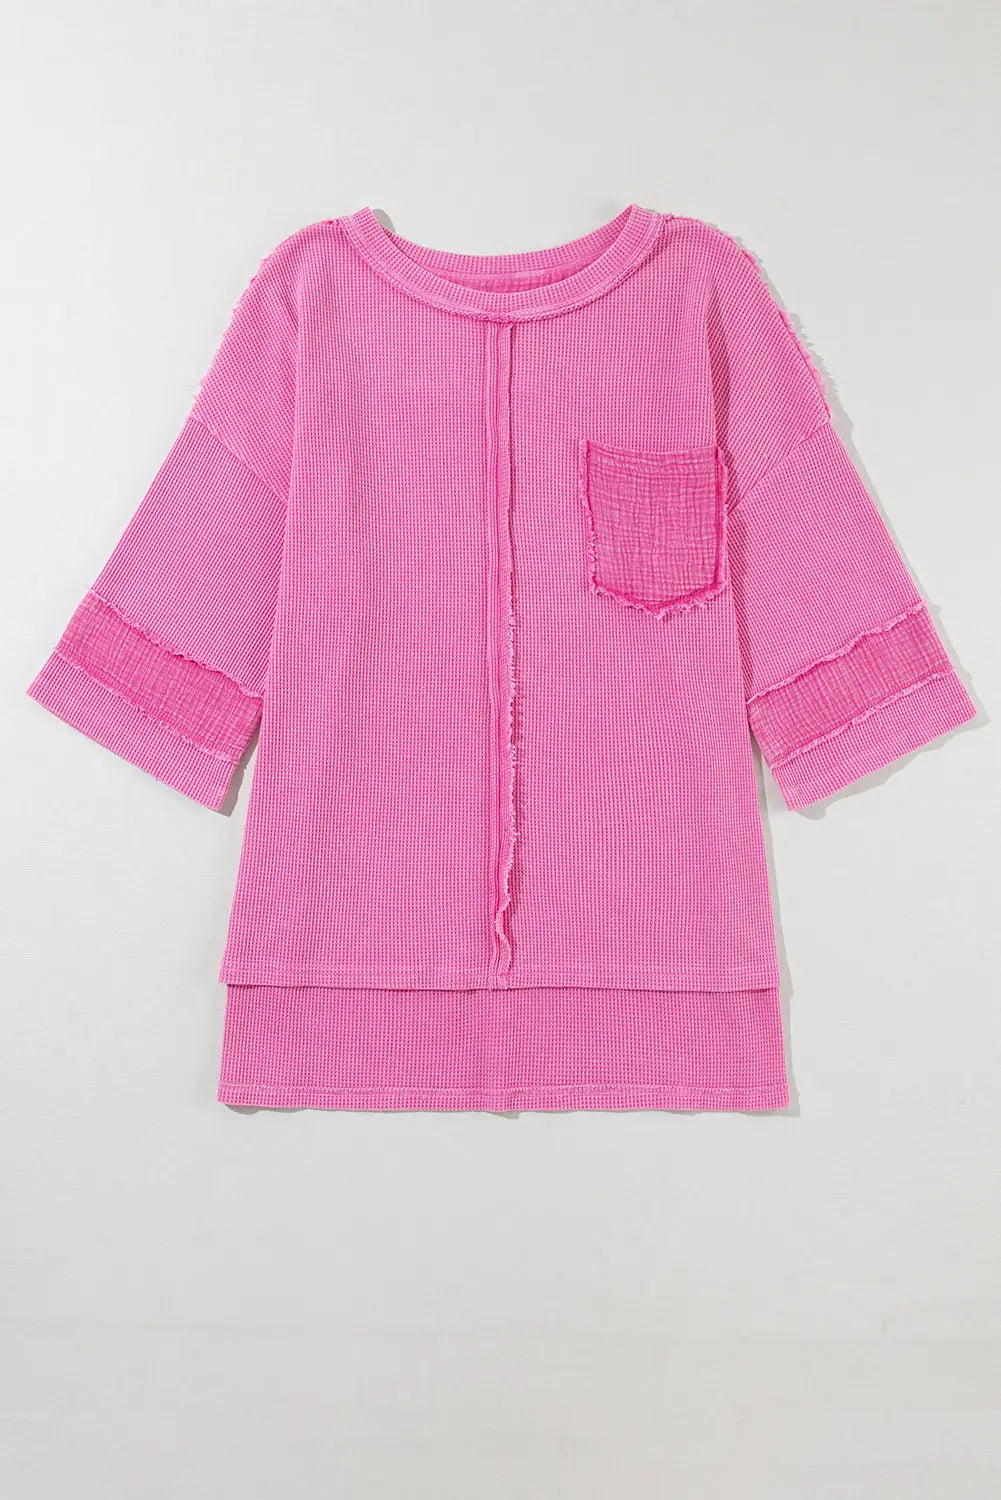 Bright pink oversized mineral wash top - tops/tops & tees